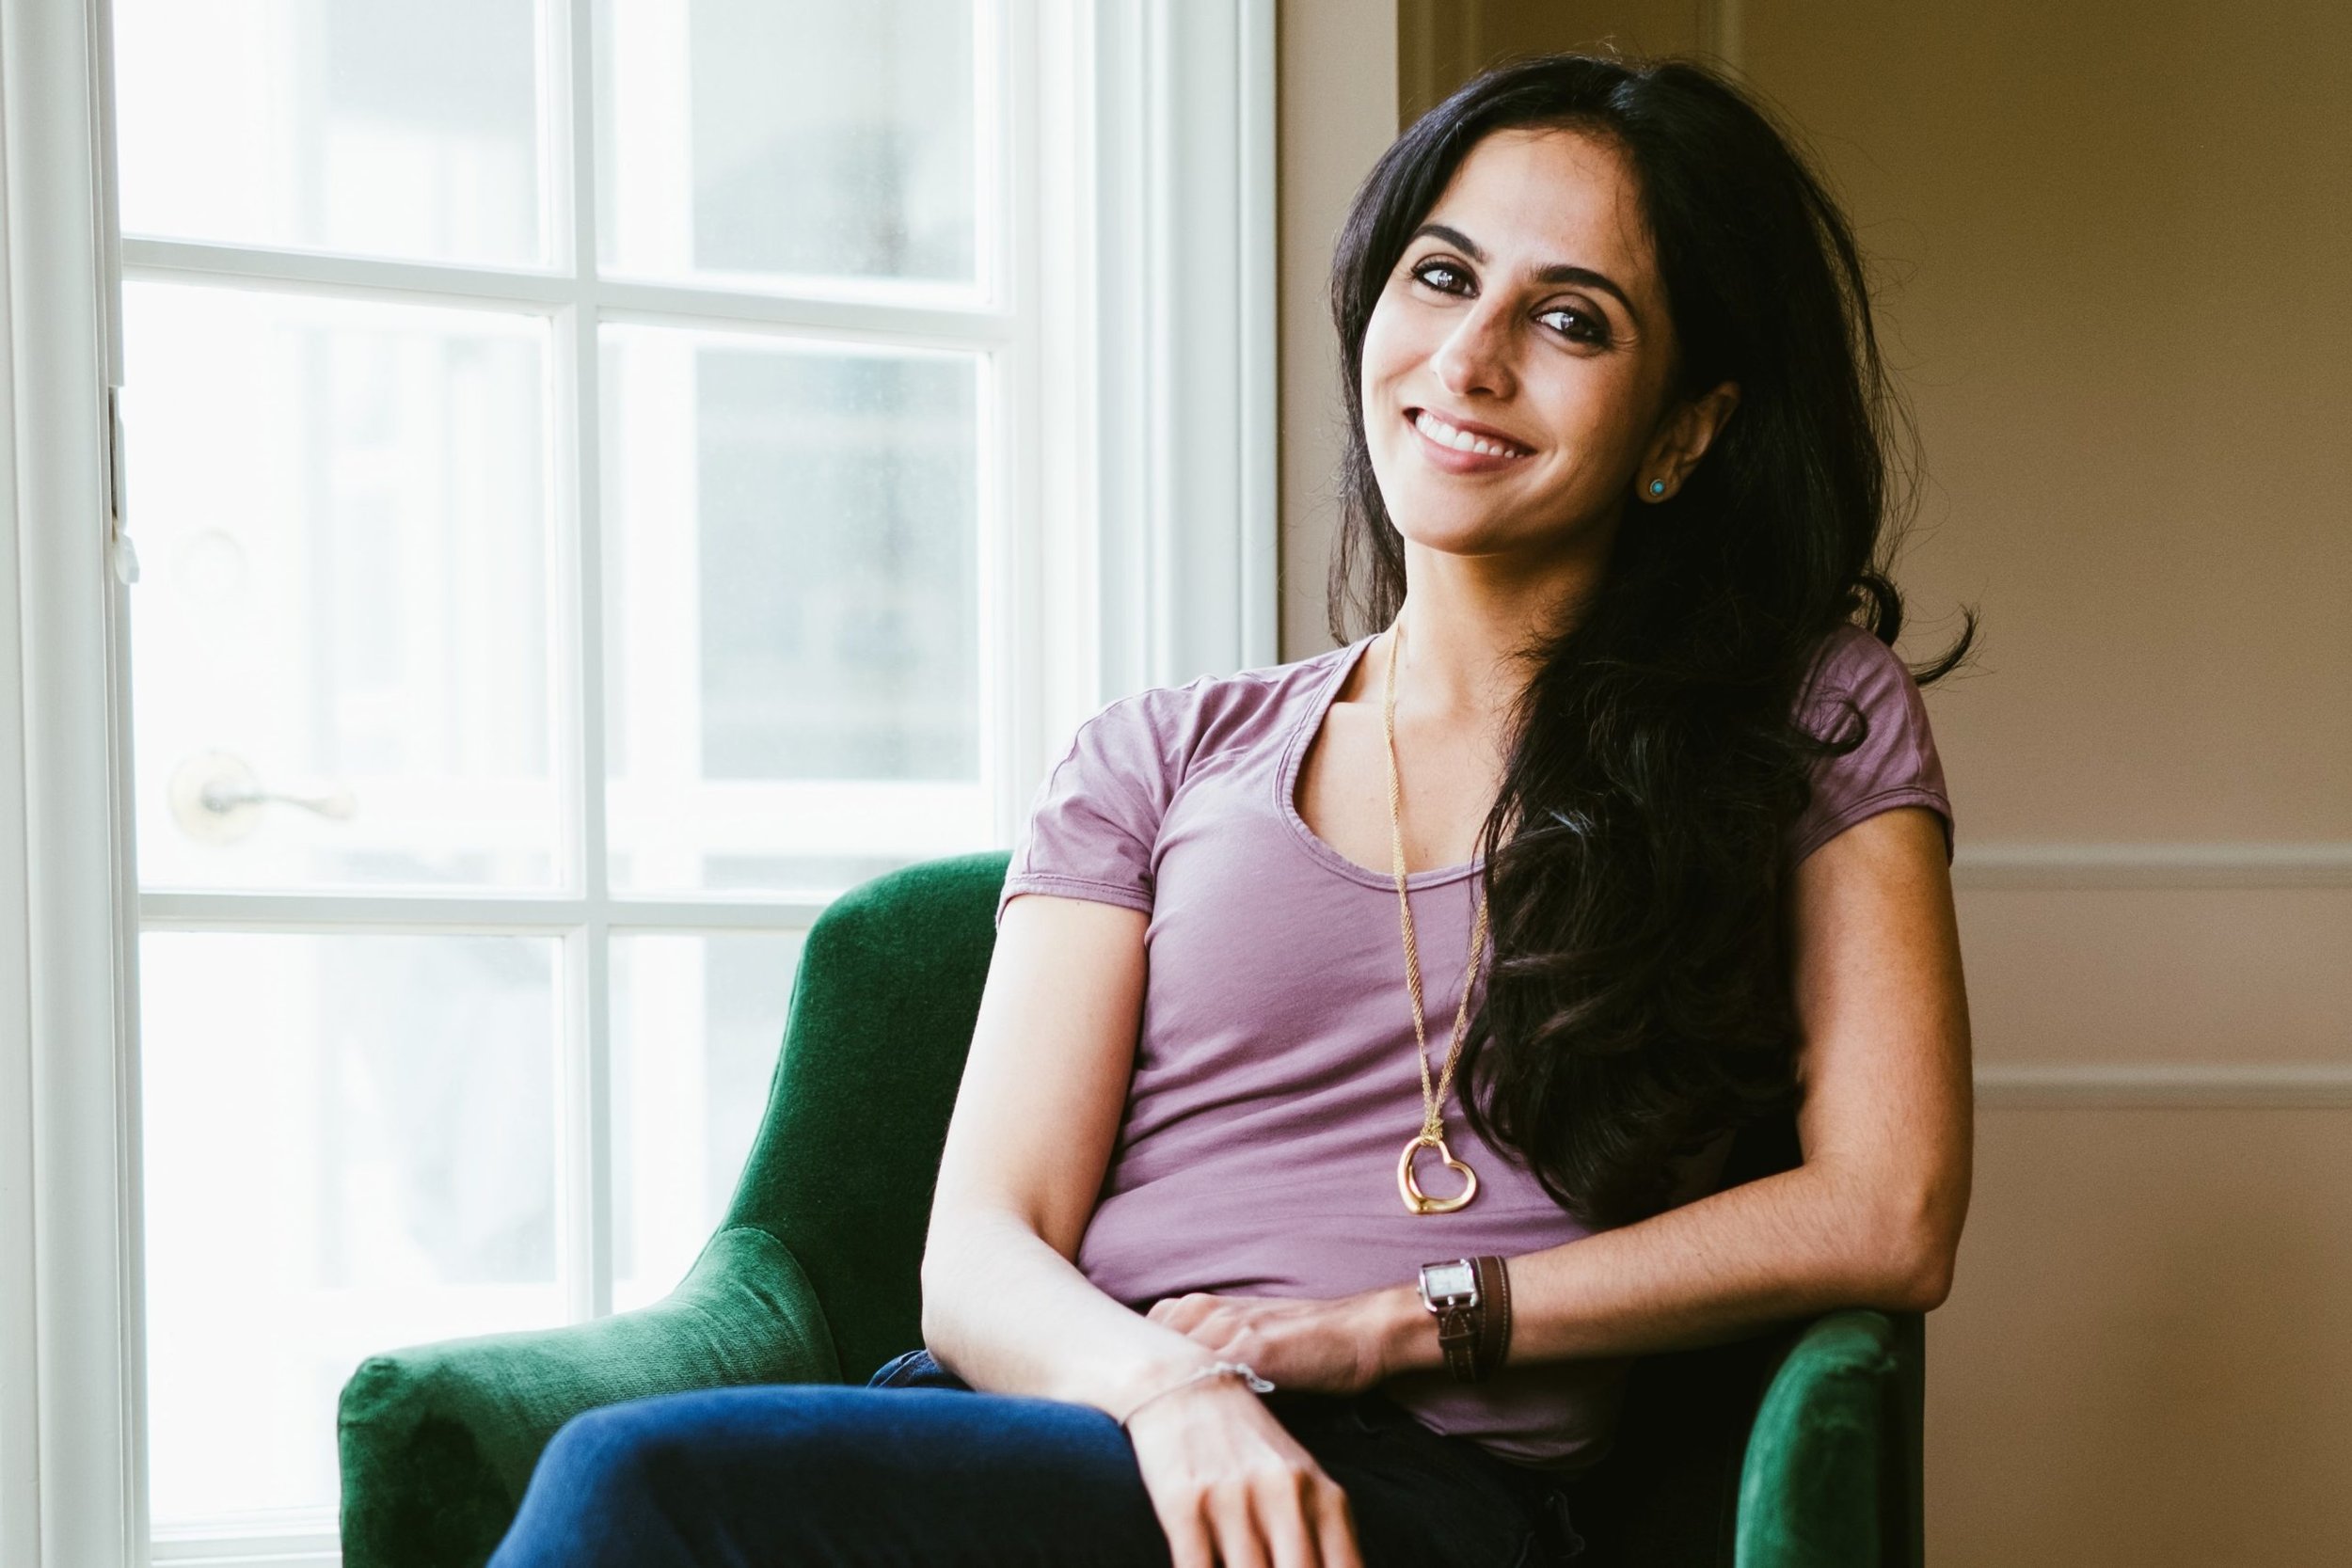 Ranavat founder Michelle Ranavat wearing a purple t-shirt, jeans, and gold heart necklace while sitting on a green velvet chair